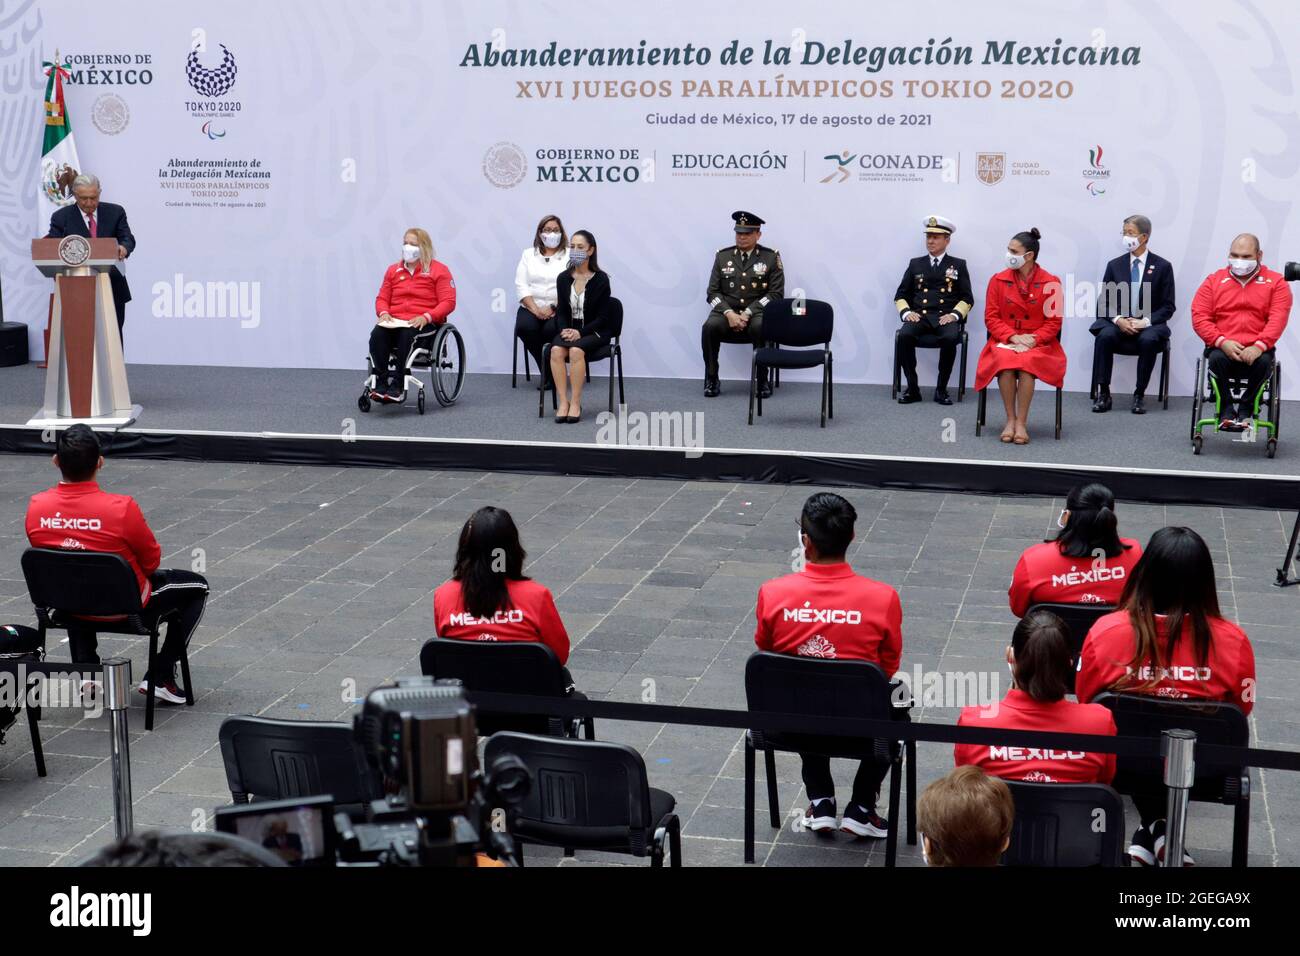 MEXICO CITY, MEXICO - AUGUST 17: Mexican President Andres Manuel Lopez Obrador, speaks, accompanied by Mexico City Mayor Claudia Sheinbaum, Director of the National Commission for Physical Culture and Sport Ana Gabriela Guevara and ambassador of Japan in Mexico, Yasushi Takase during  a ceremony   with Mexico's athletes heading to the Tokyo 2020 Paralympic Games at National Palace on August 17, 2021 in Mexico City, Mexico. Credit: Luis Barron/Eyepix Group/The Photo Access Stock Photo